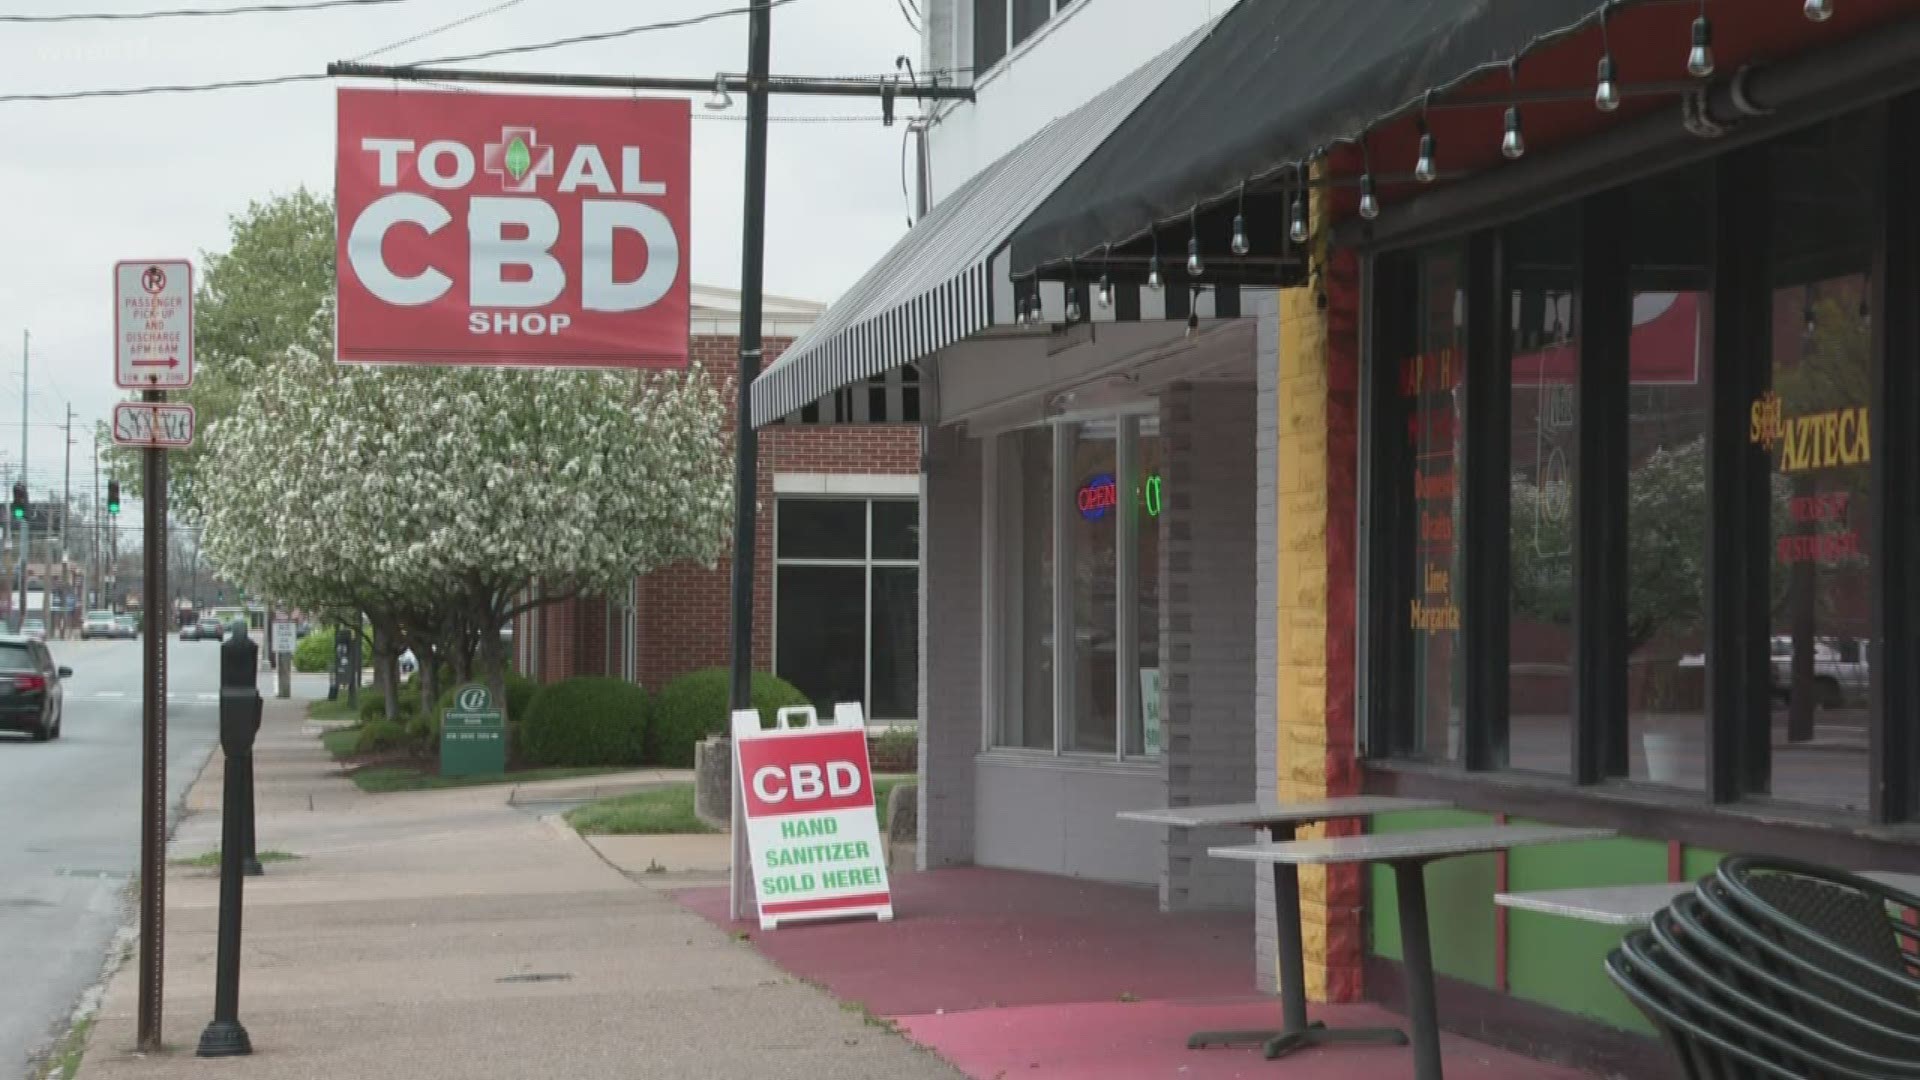 "total cbd" is taking the ethanol used in the extraction of hemp and making hand sanitizer instead.